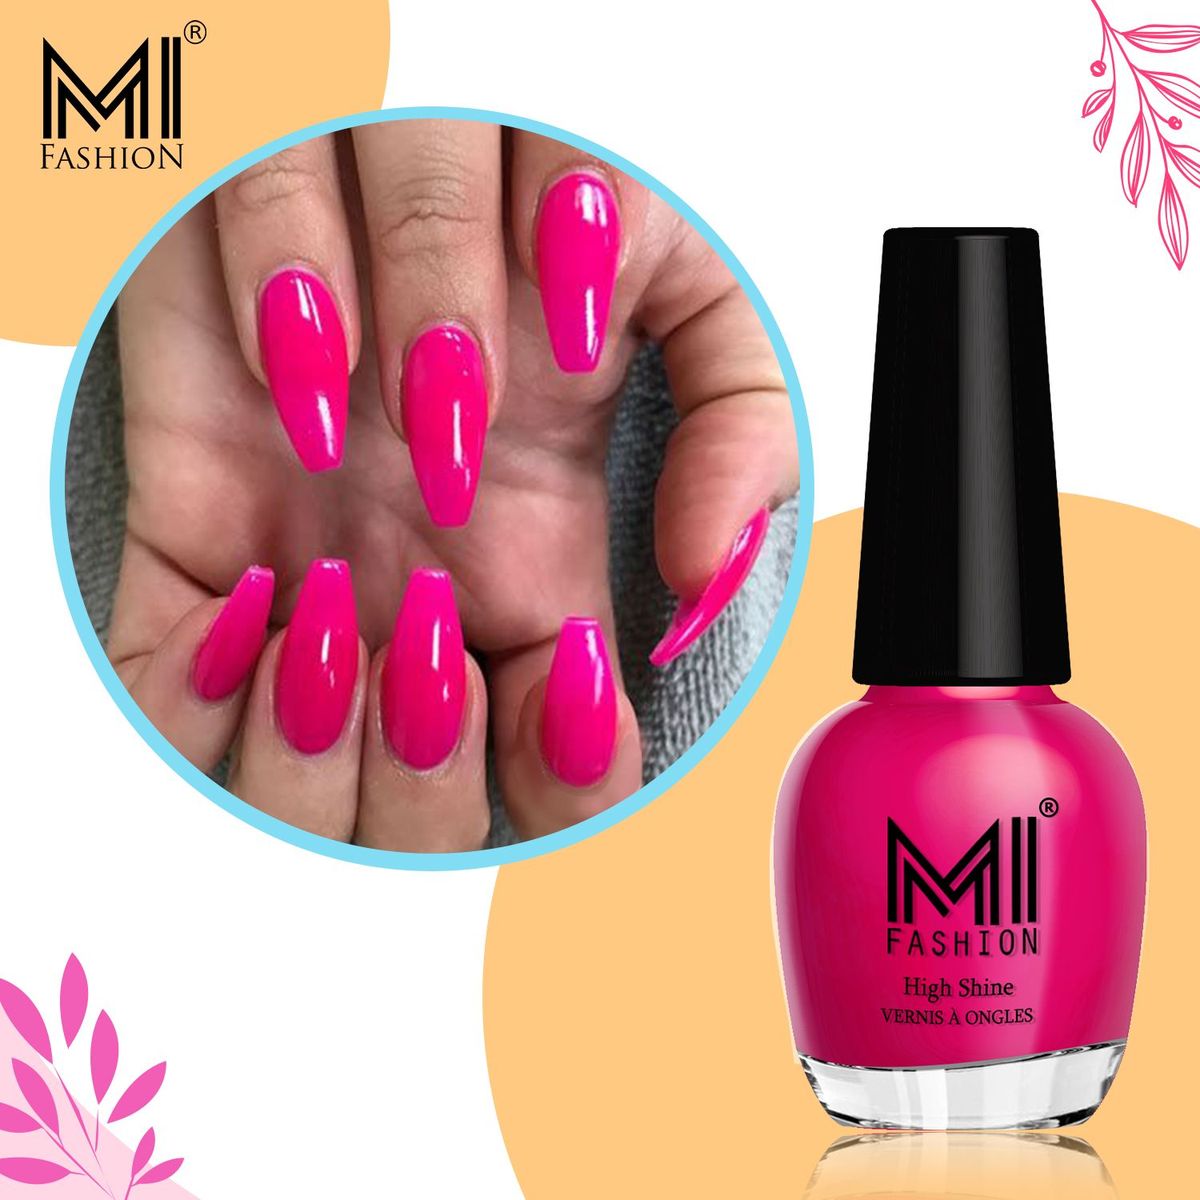 MI FASHION Nail Polish With Radiant Shine And High Defination Which Remains  Long-Lasting Light Pink,TAN,Nude Pink - Price in India, Buy MI FASHION Nail  Polish With Radiant Shine And High Defination Which